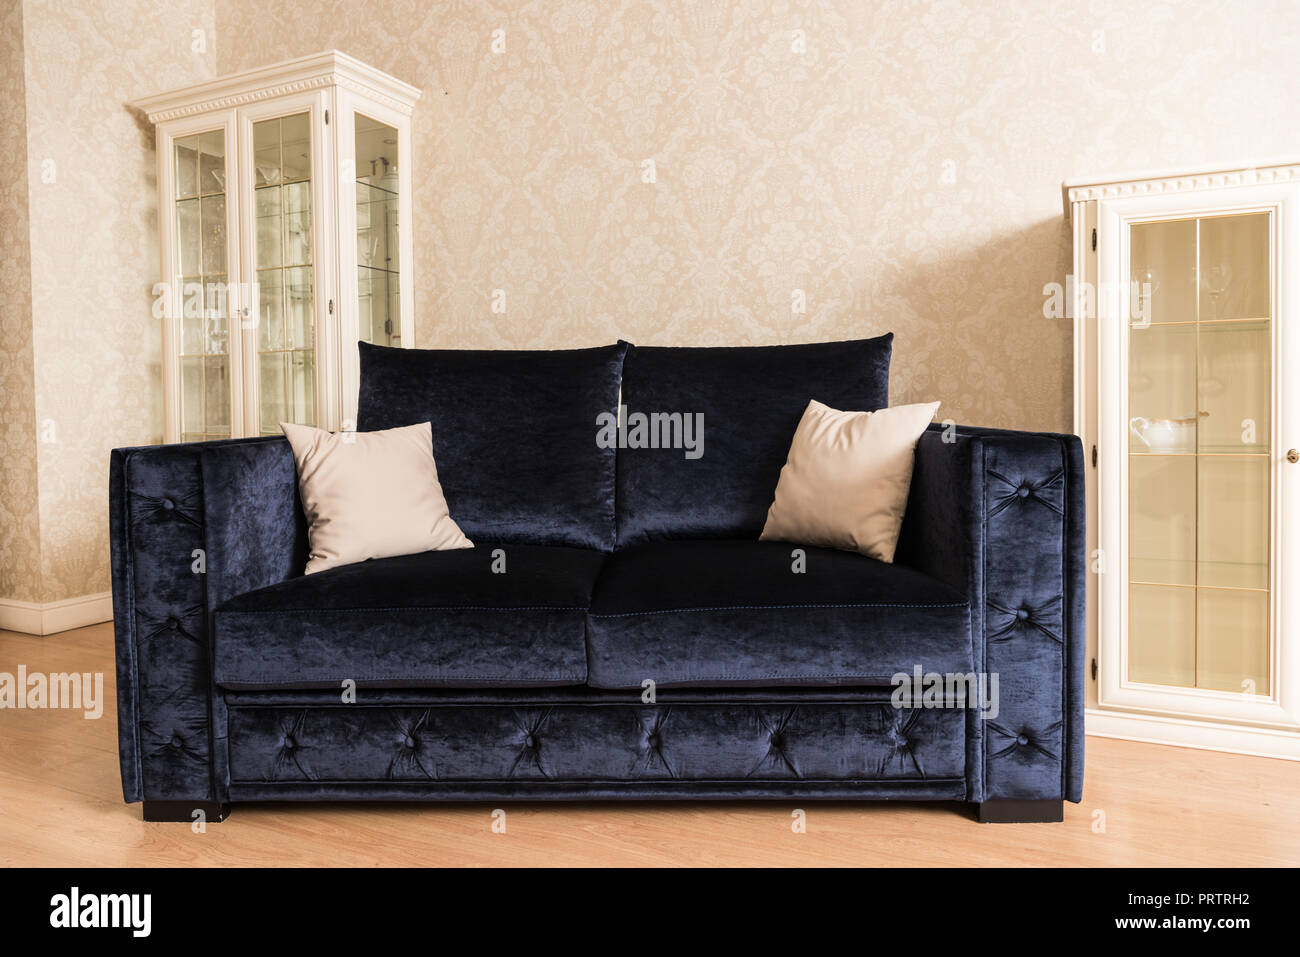 interior of living room with blue sofa and white pillows Stock Photo